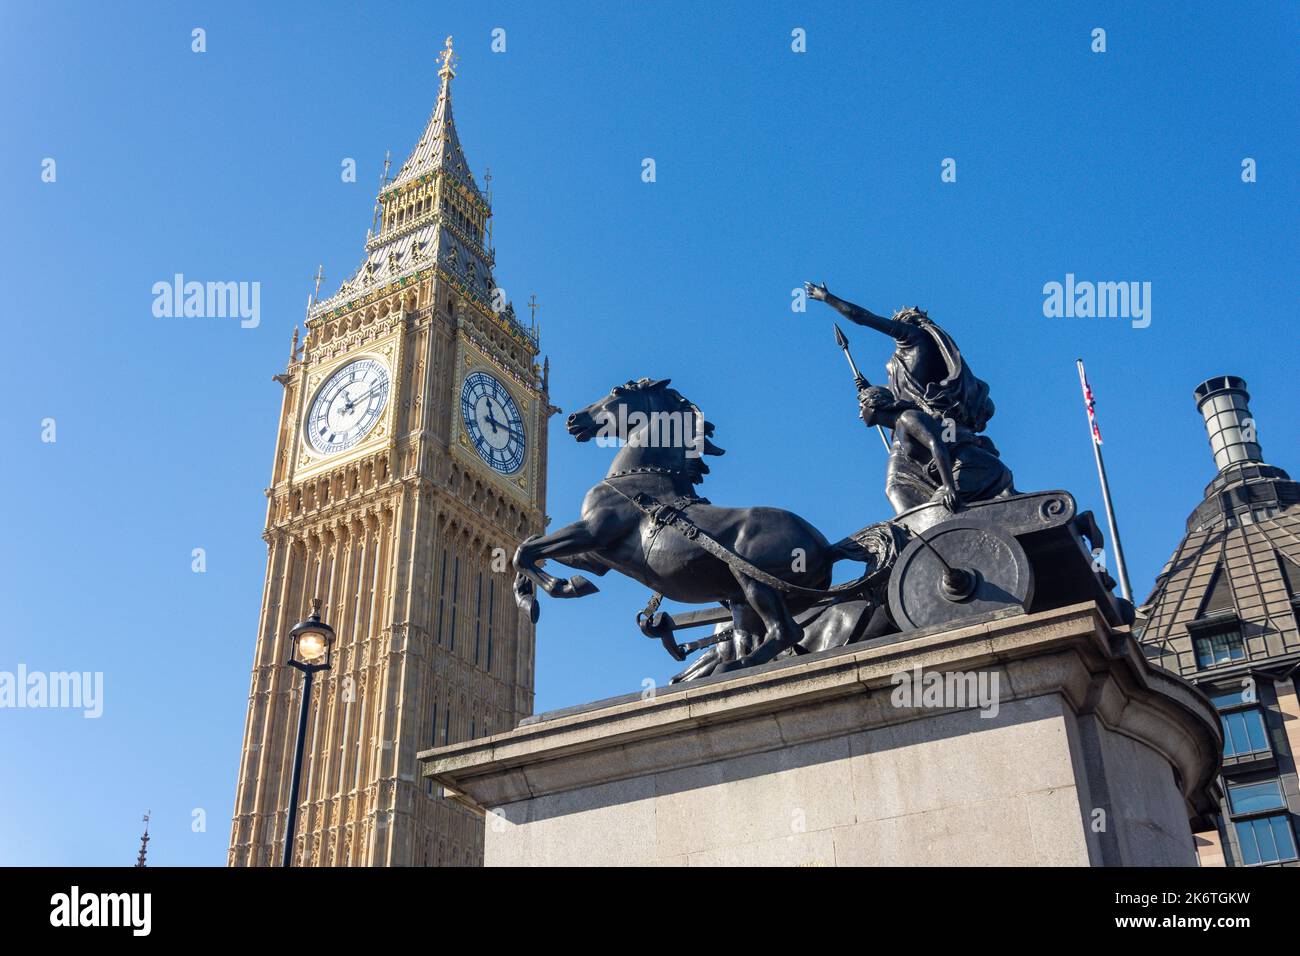 Big Ben clock tower and Boudicca Statue from Westminster Bridge, City of Westminster, Greater London, England, United Kingdom Stock Photo